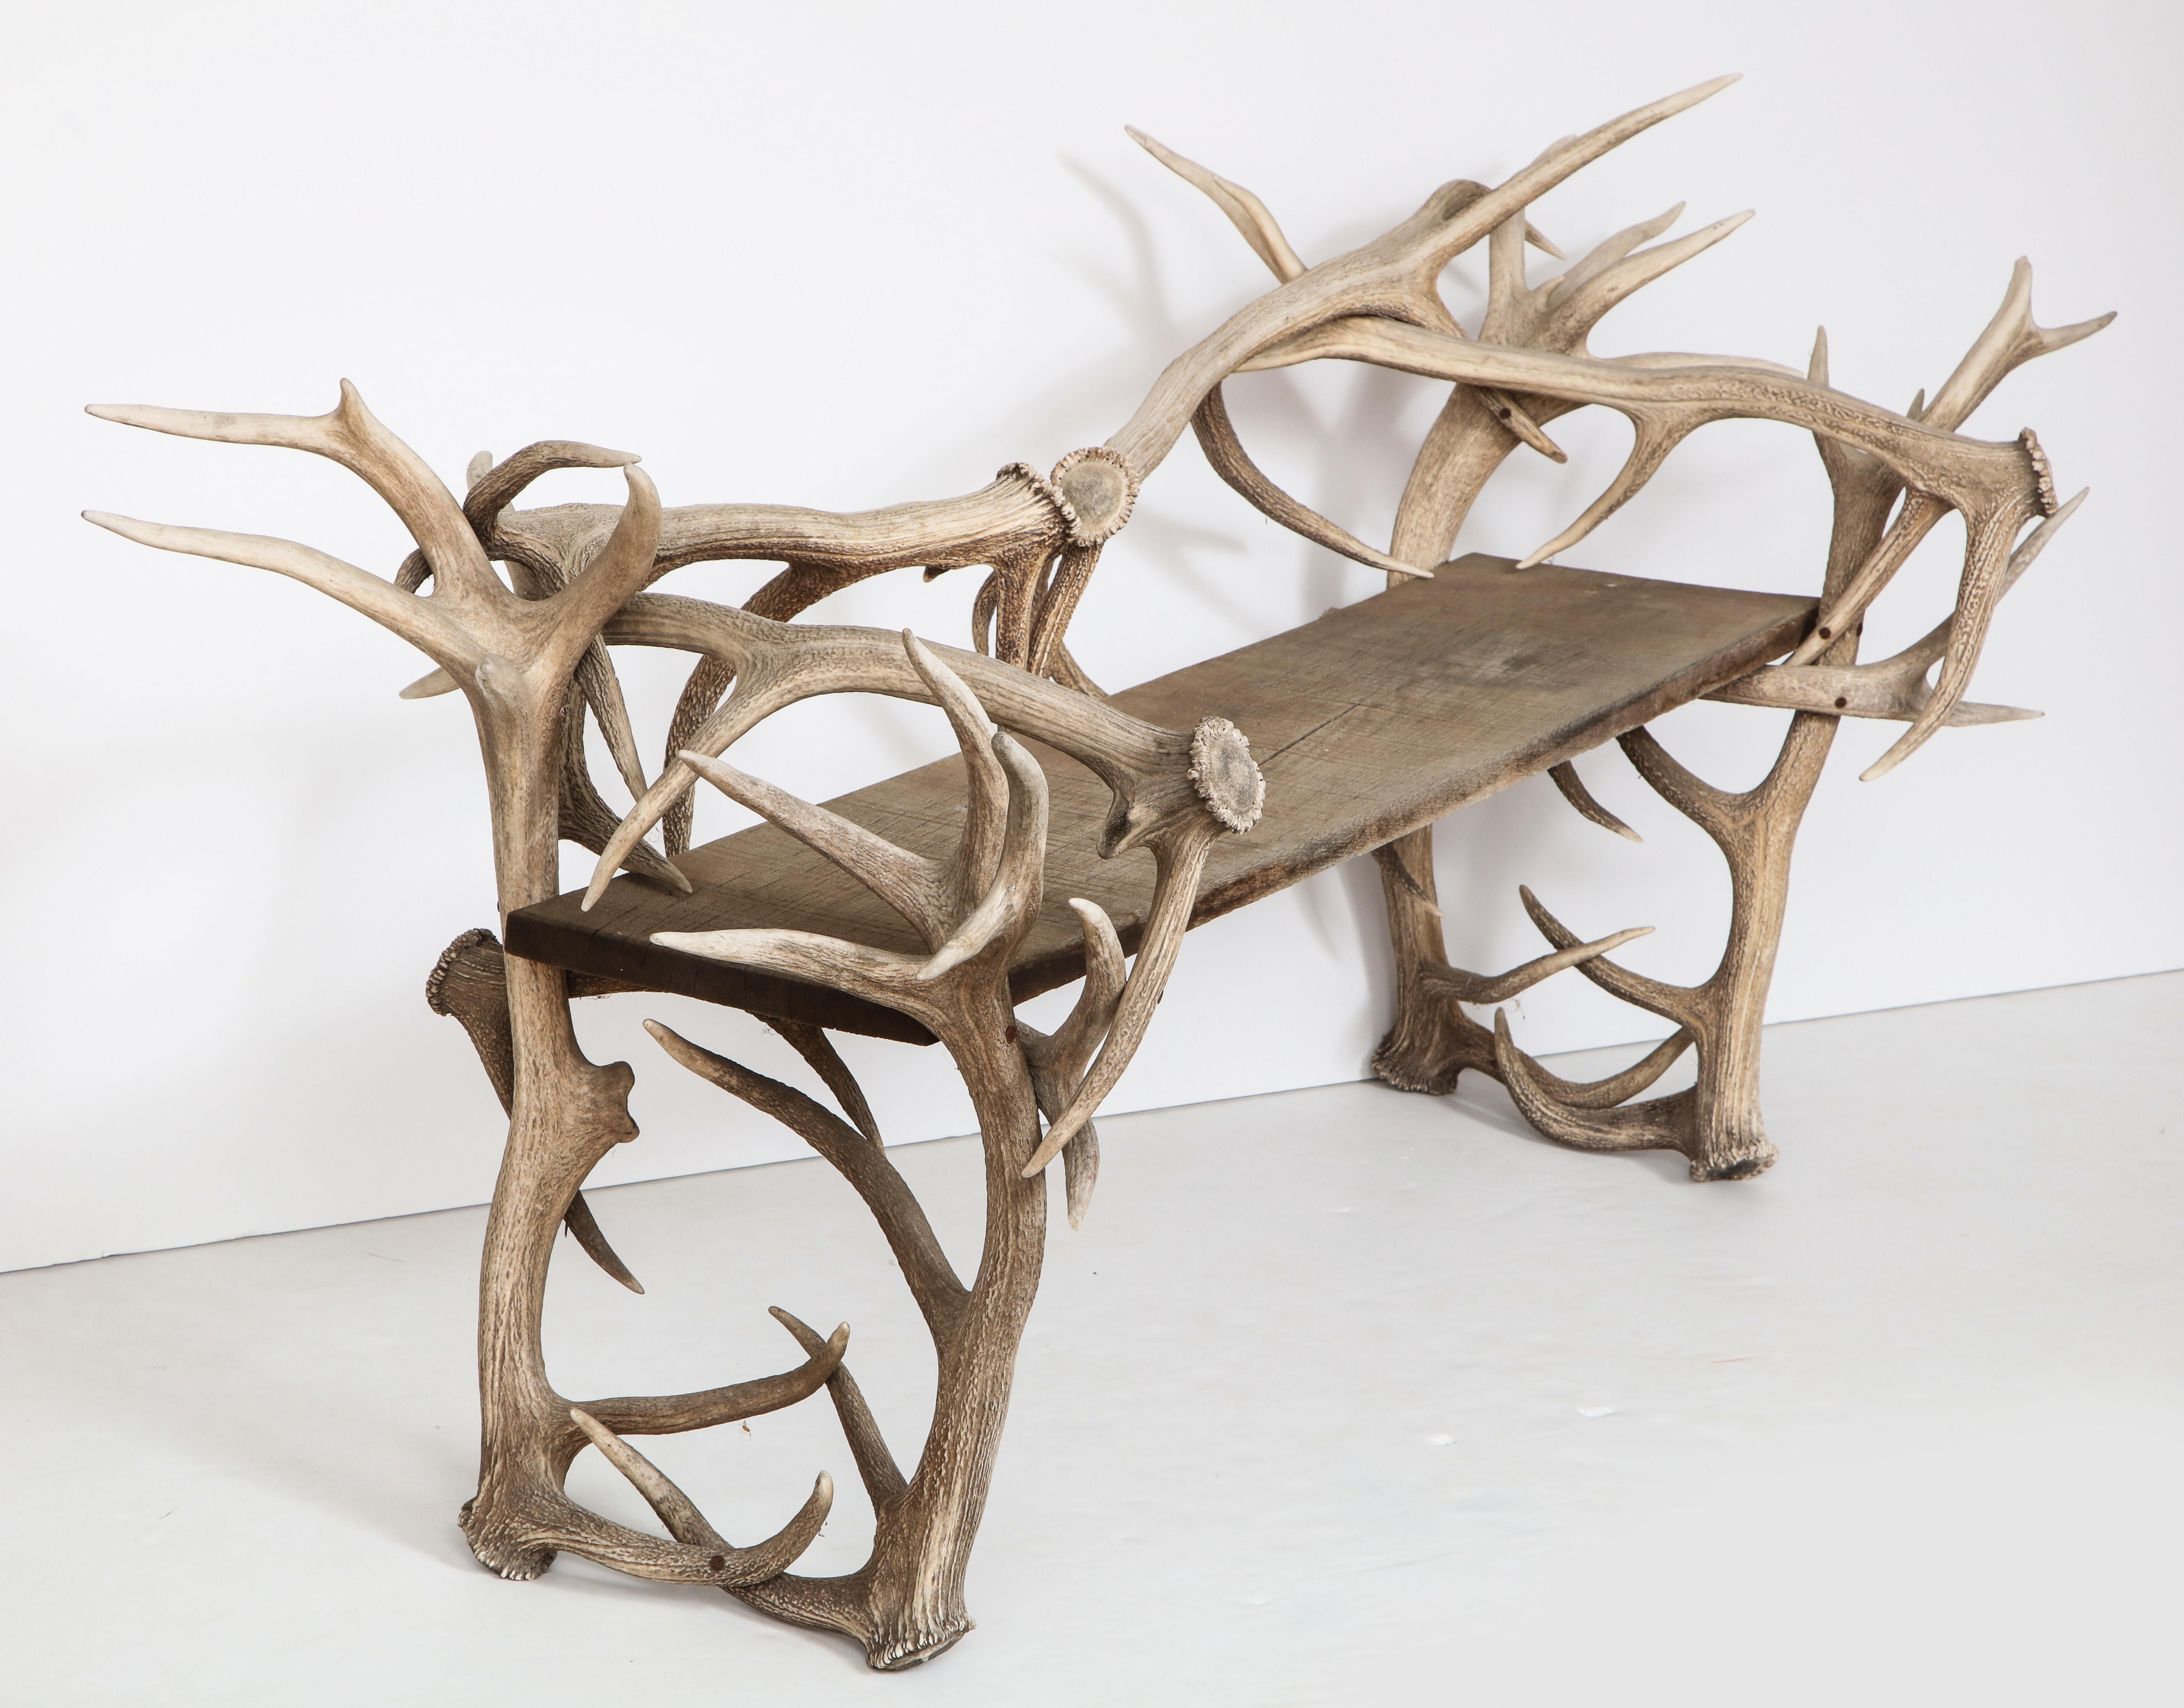 Spectacular Antler chair or bench.
Beautifully crafted chair or bench of Antlers with a rustic wooden seat.